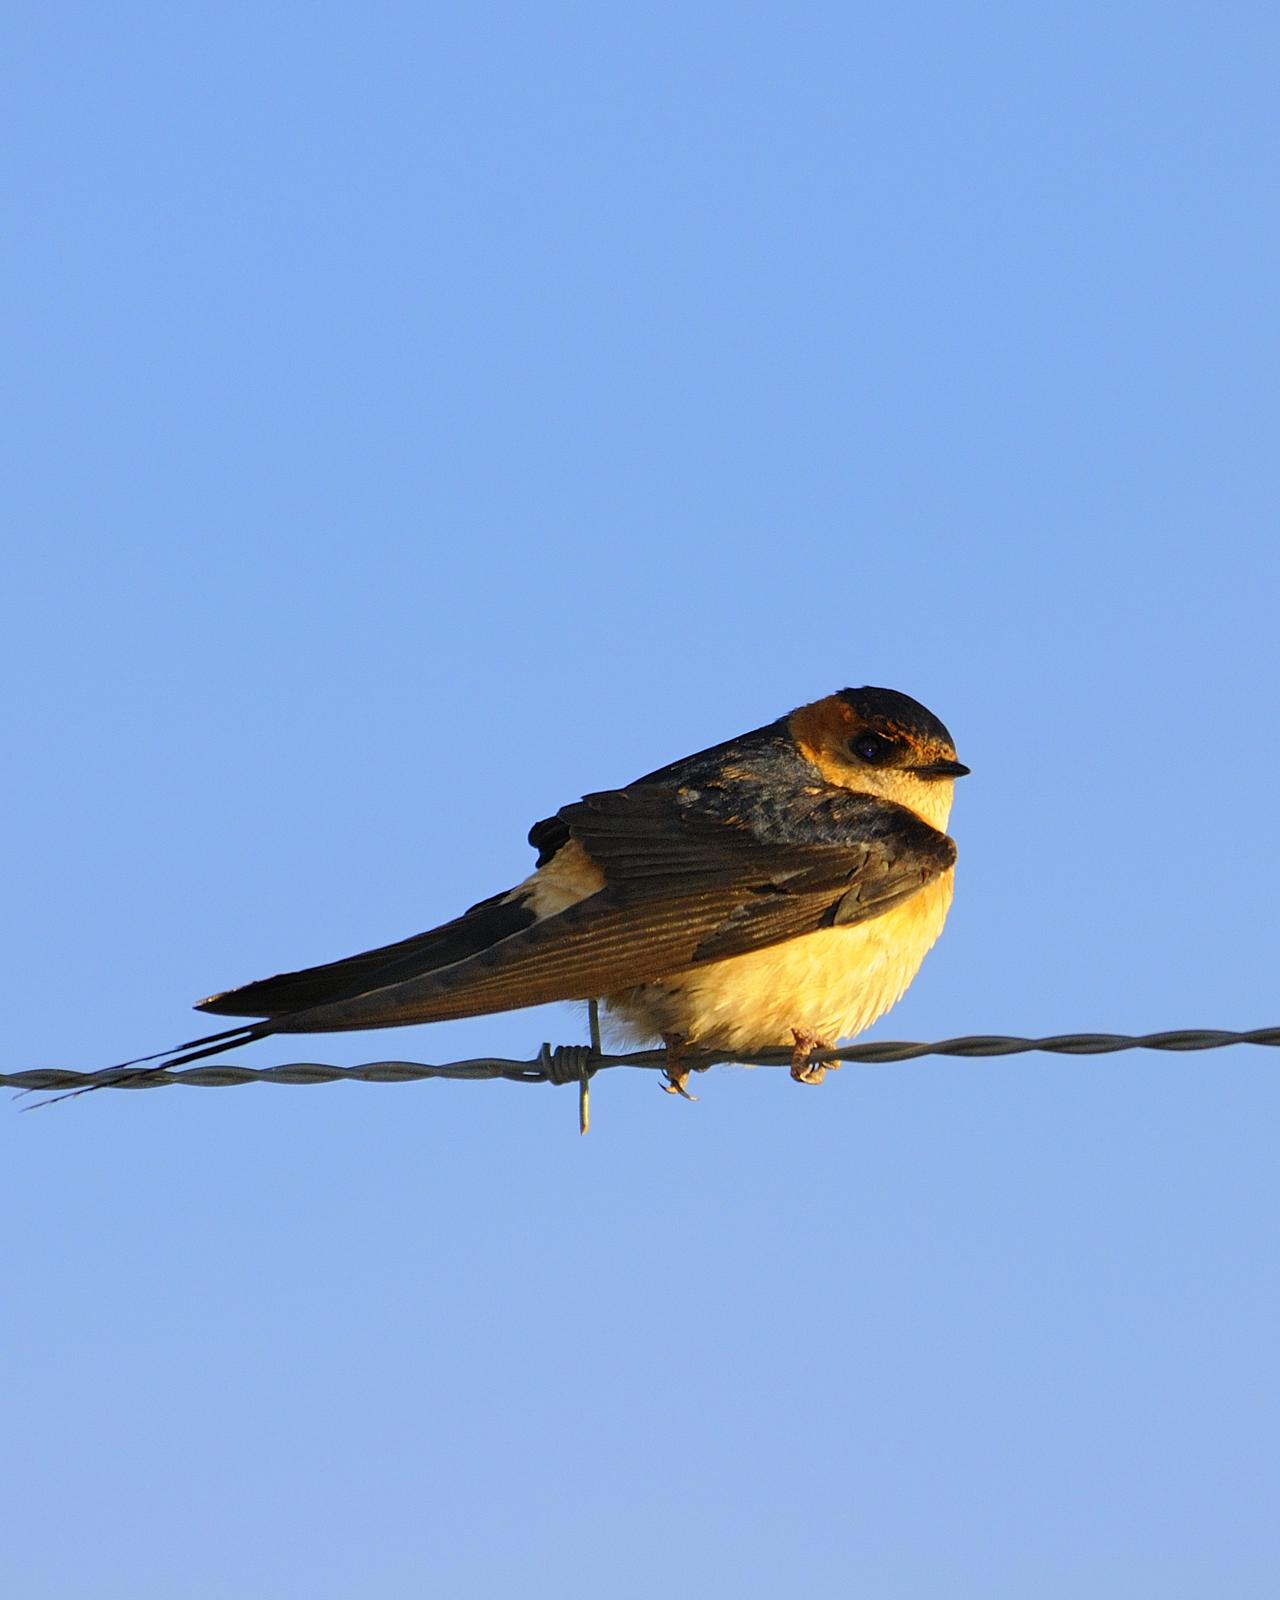 Red-rumped Swallow Photo by Andres Rios